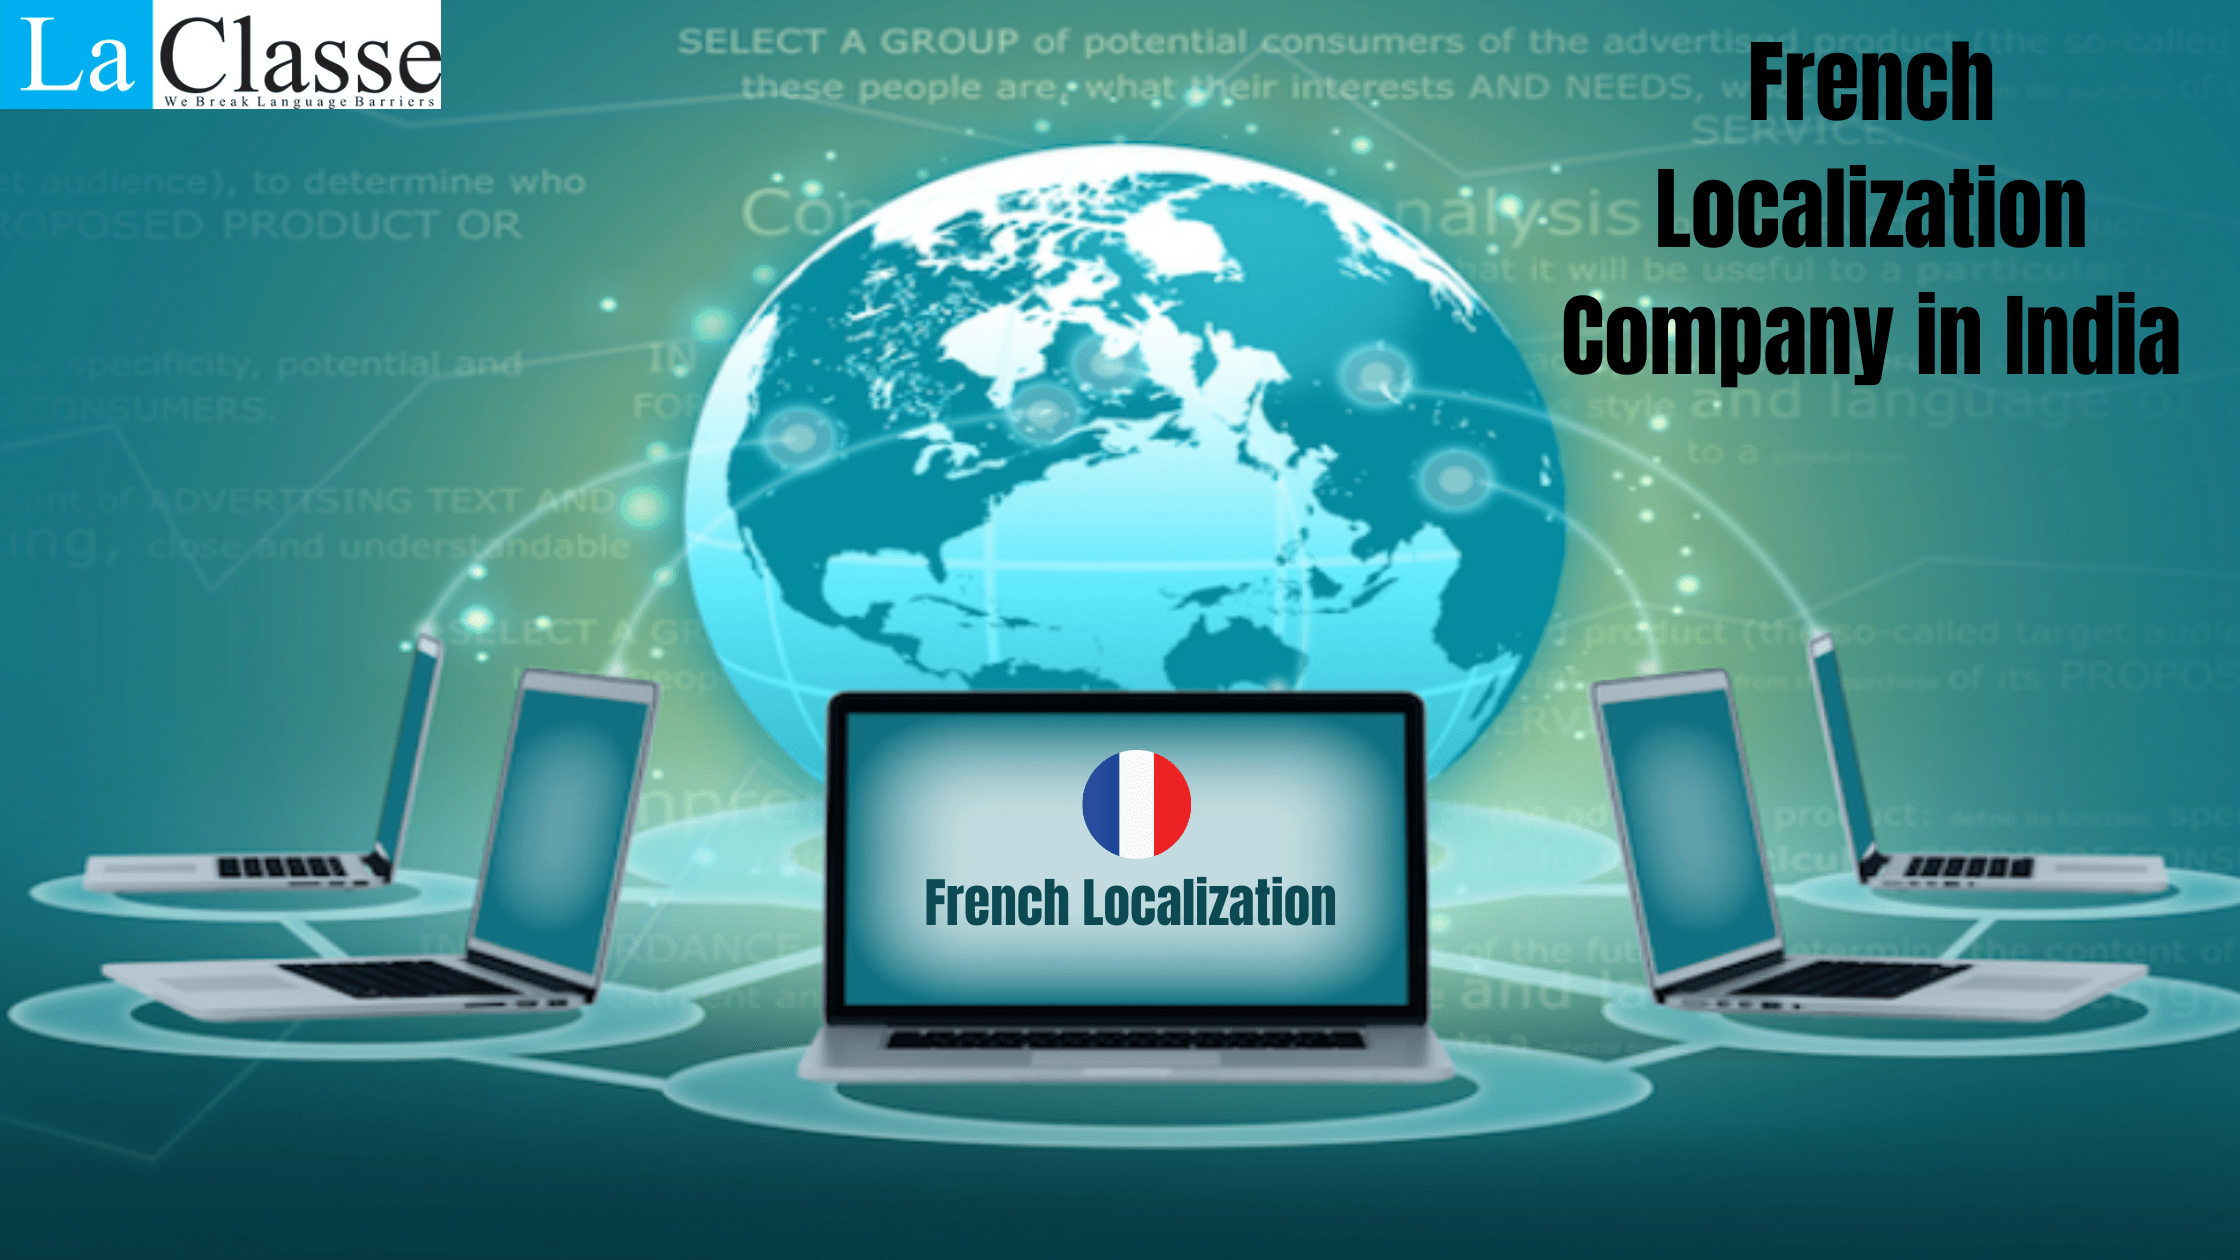 French Localization Company in India